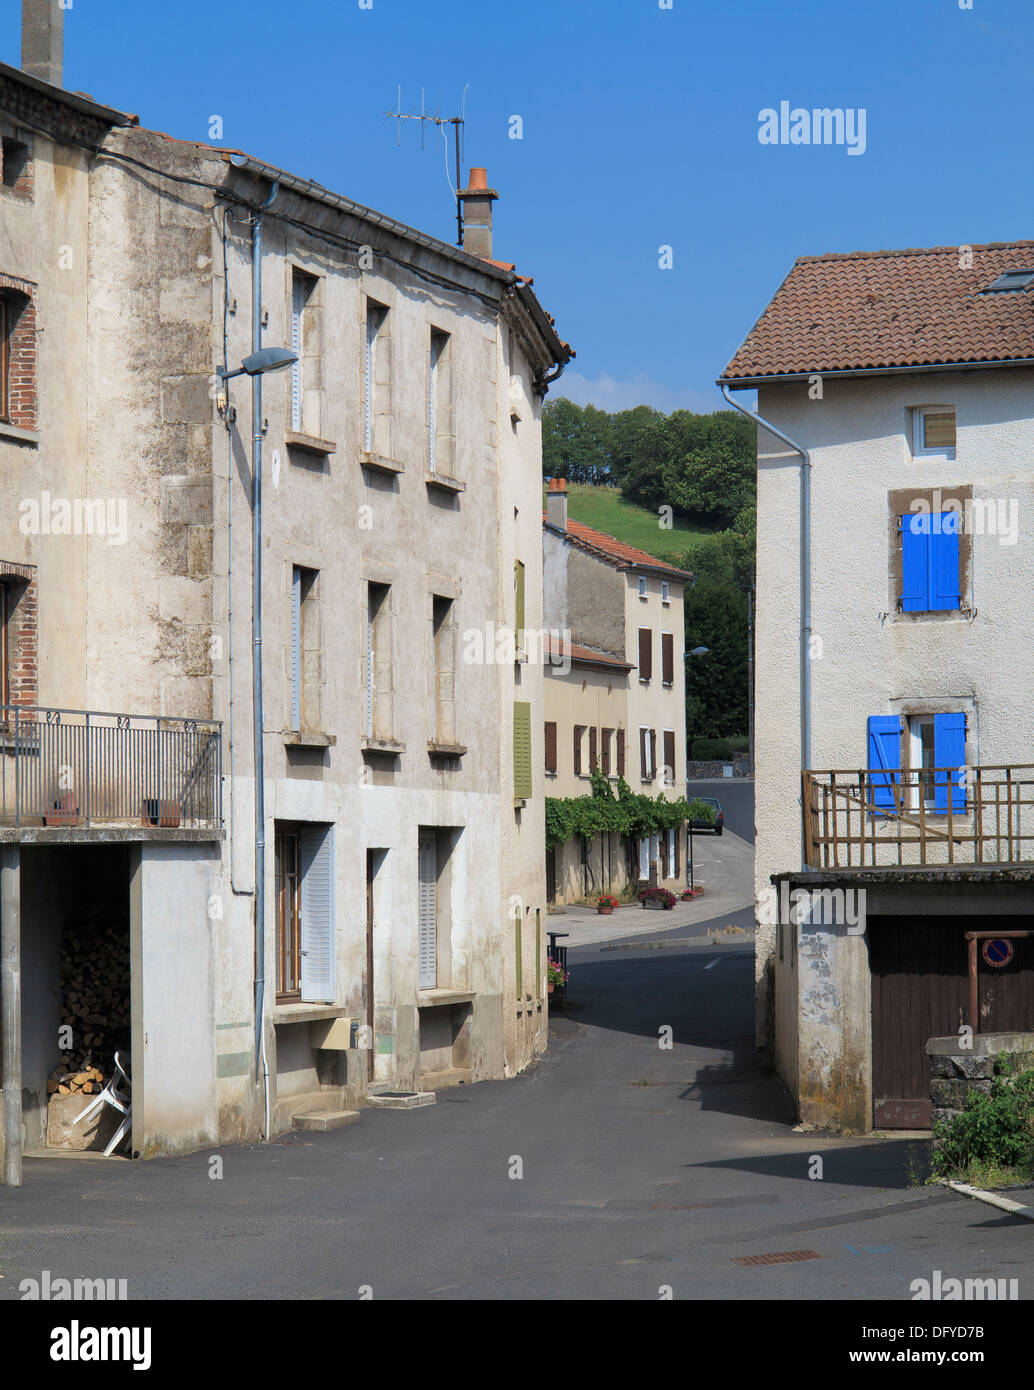 St romain hi-res stock photography and images - Alamy